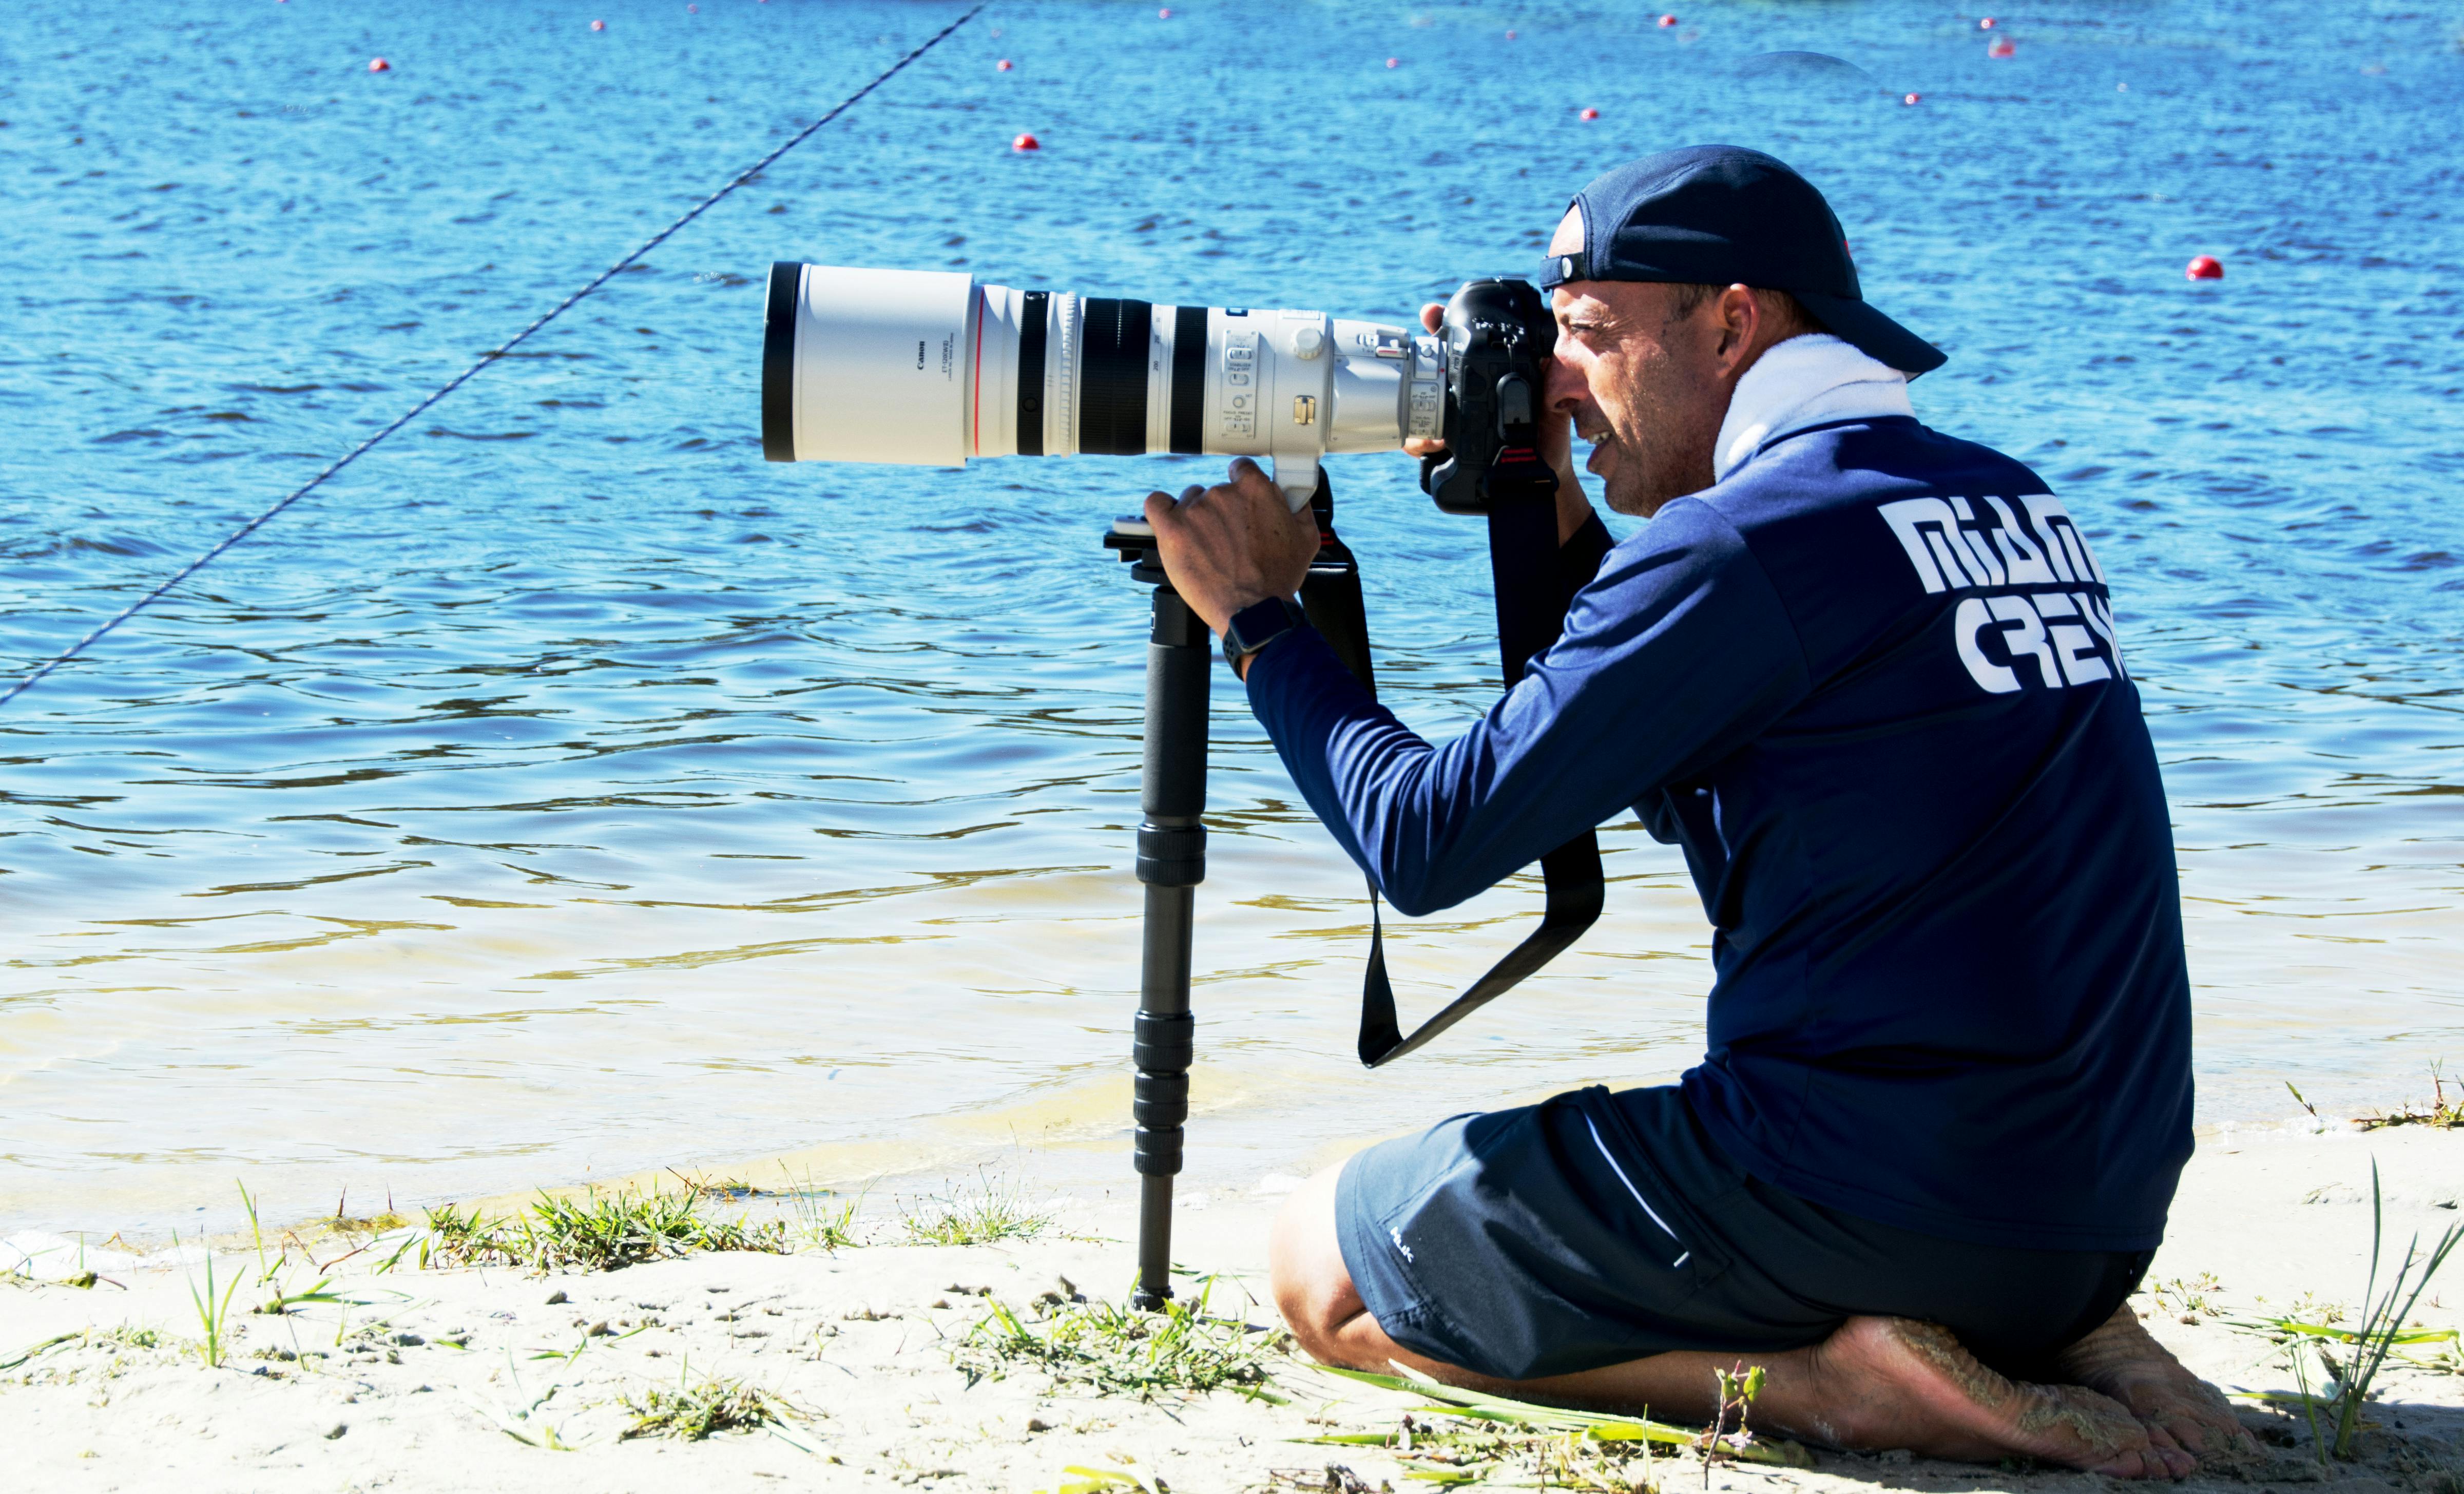 Free stock photo of Sports Photographer at work